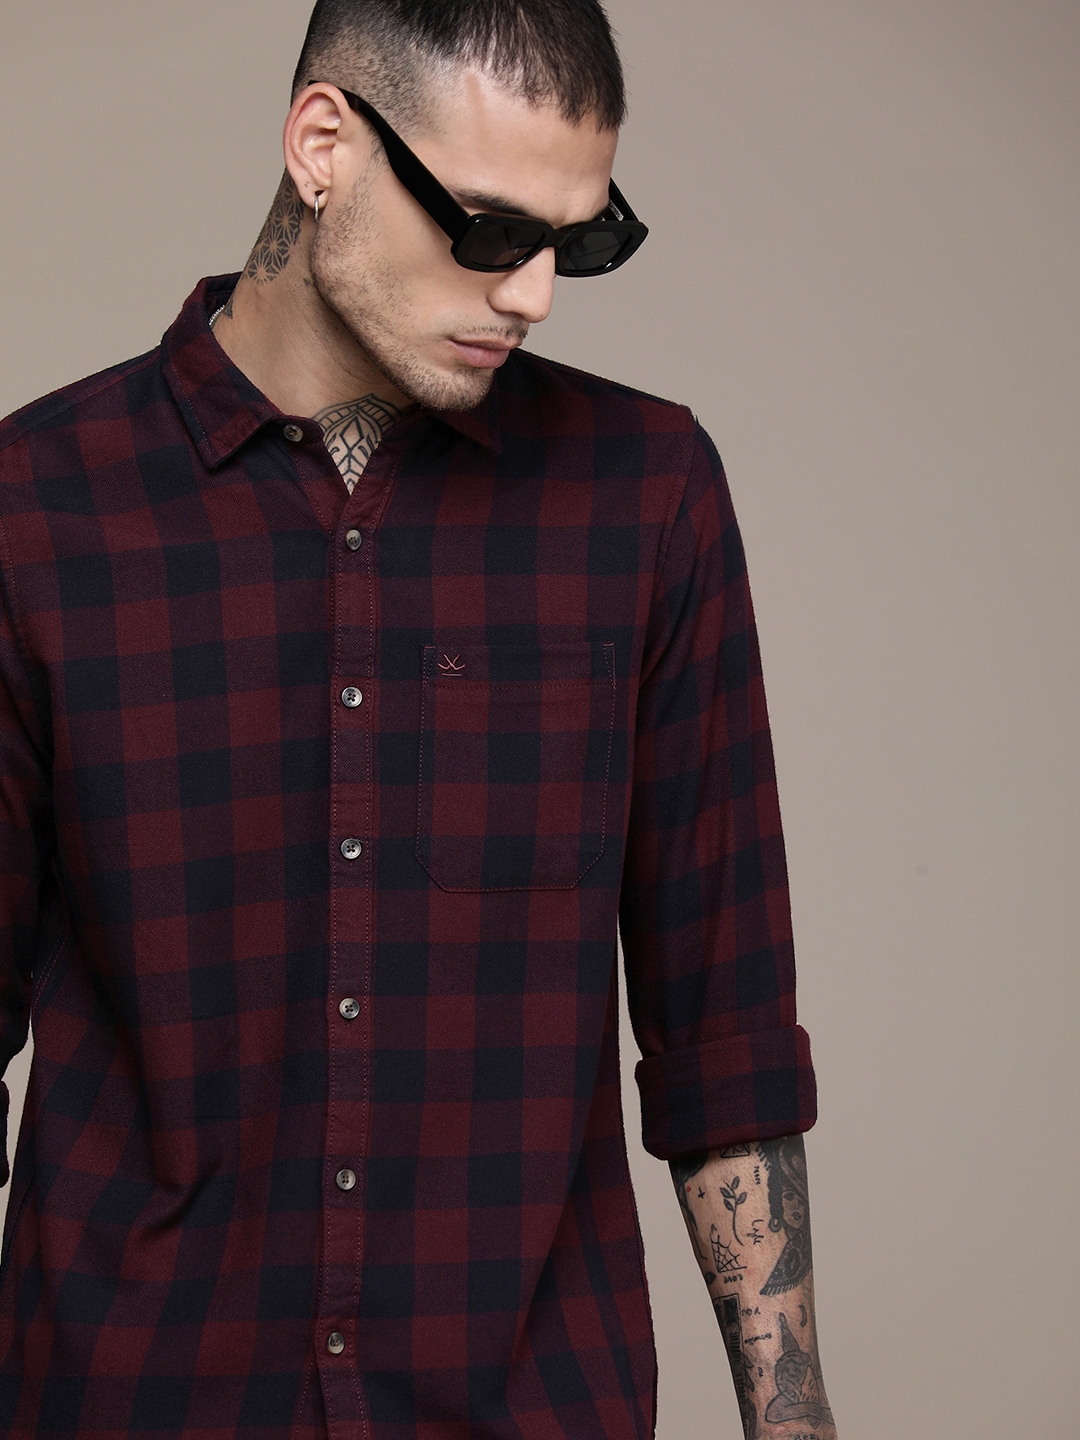 WROGN Pure Cotton Slim Fit Buffalo Checked Casual Shirt